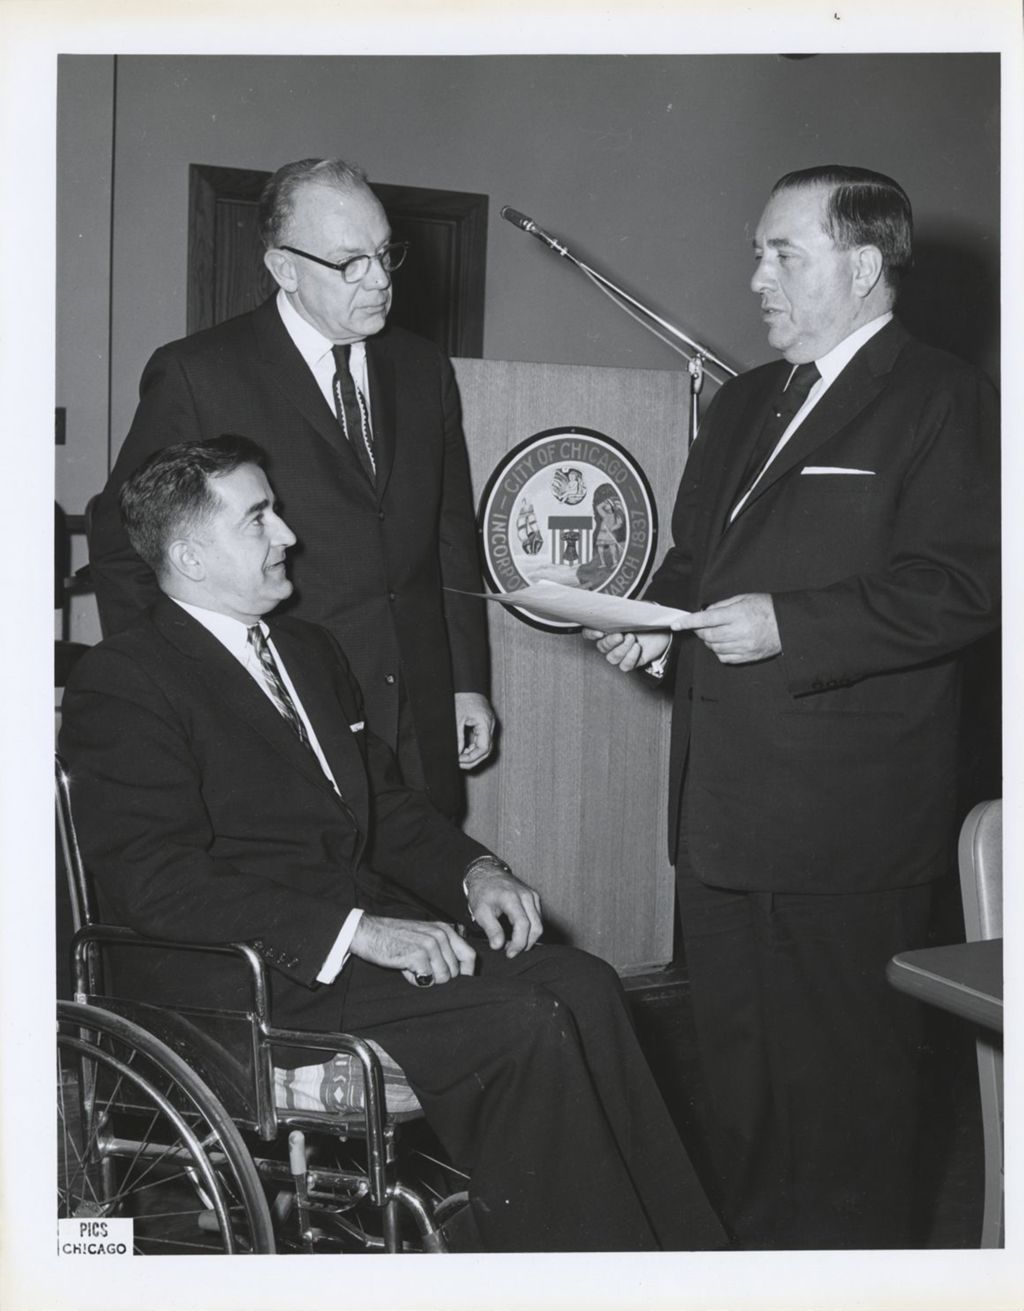 Richard J. Daley with document